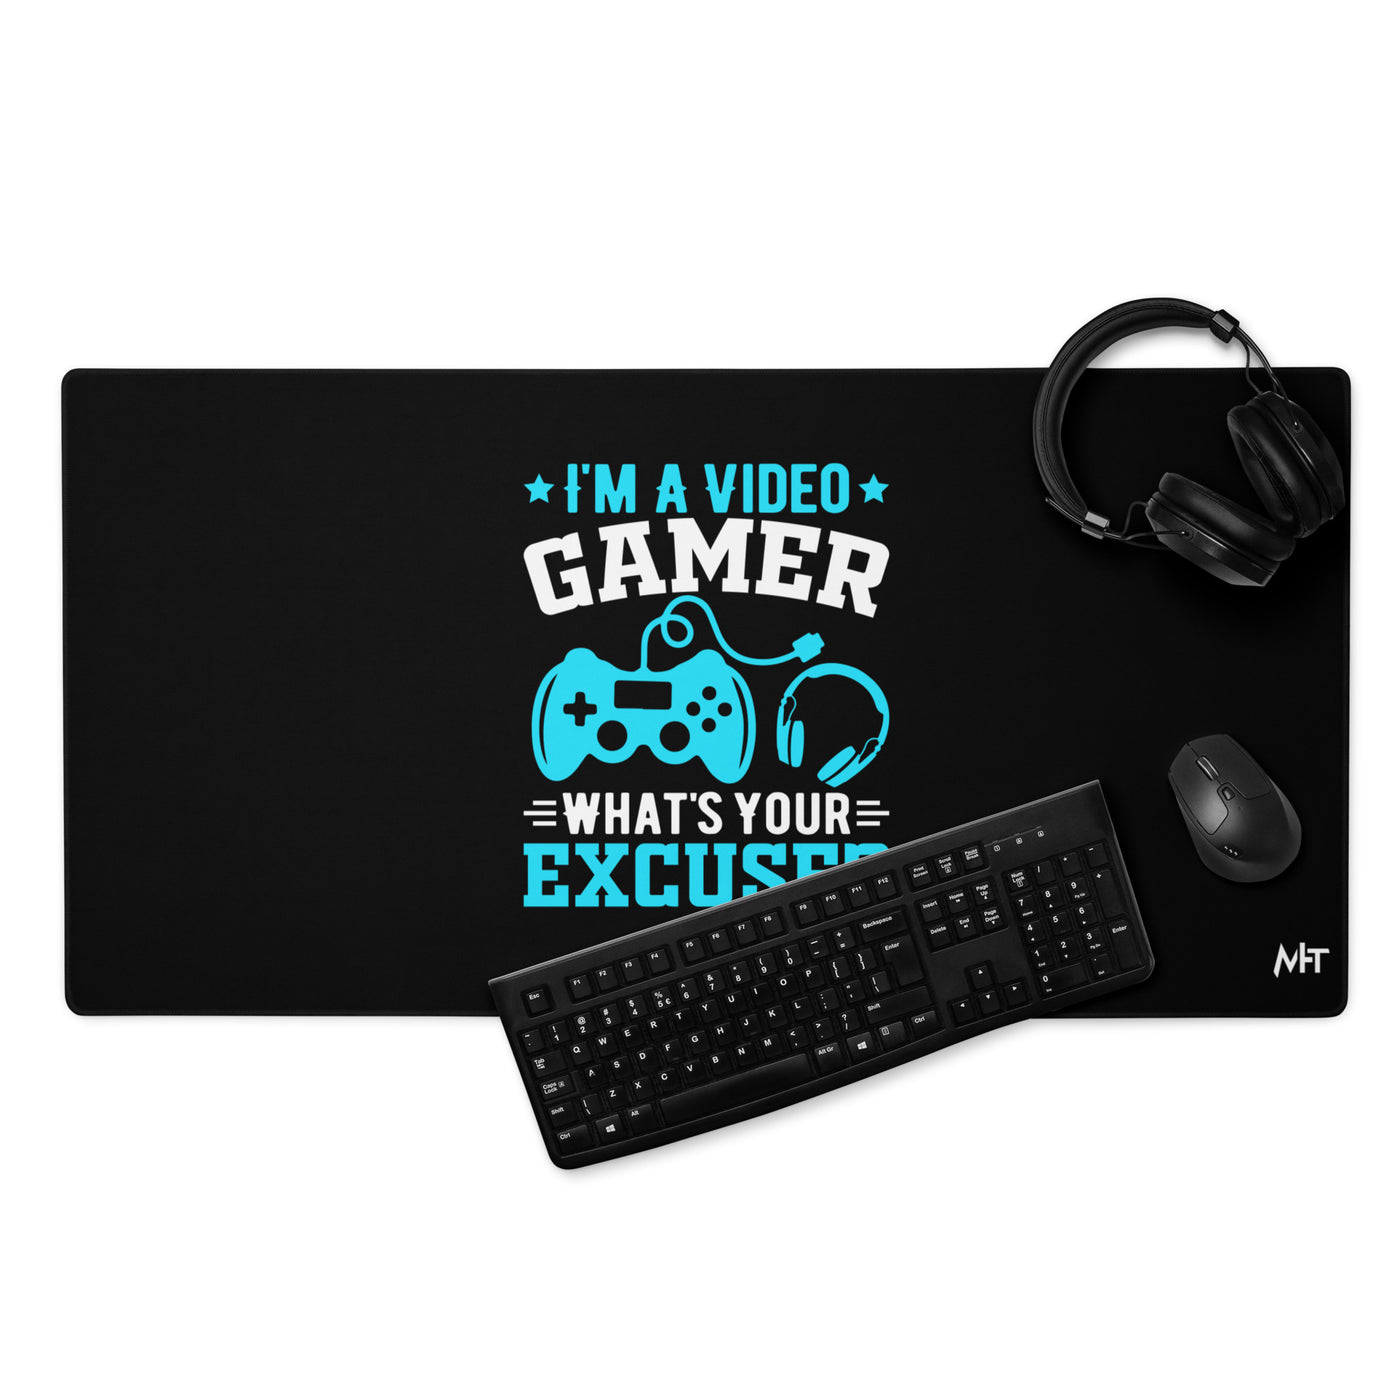 I am a Video Gamer! What is Your Excuse? Desk Mat